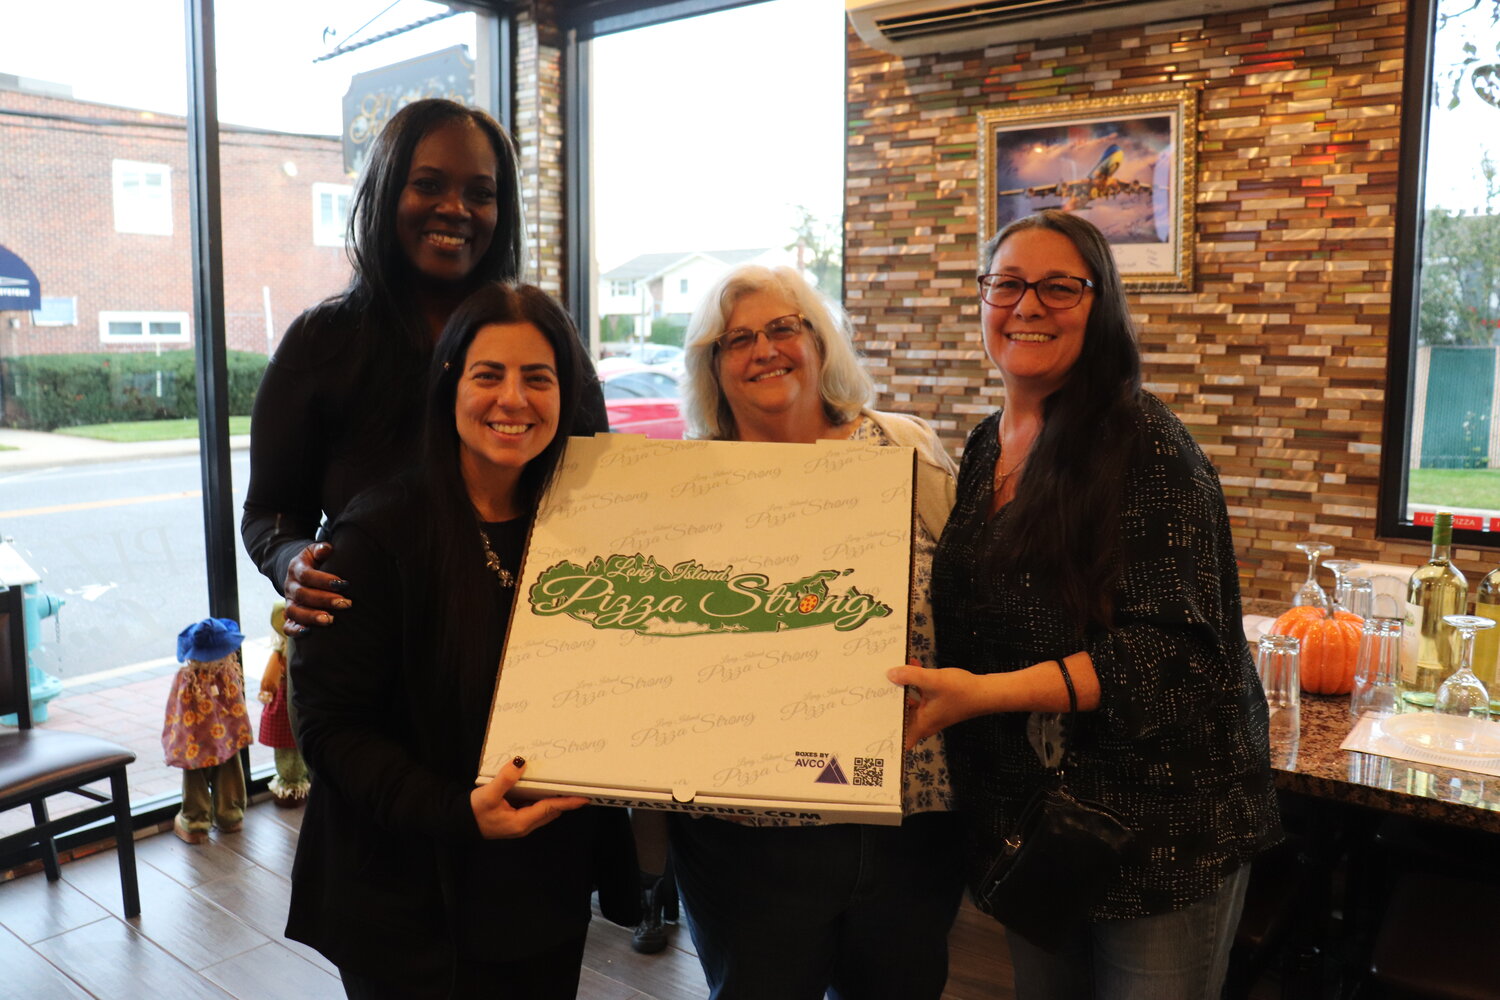 Maggie Samlal of Elmont, Anna Cortesiano, owner of Salvatore’s of Elmont, Lori Walz of Garden City South, and Kathy Elfassy of Elmont helped raise money for families affected by the Sept. 21 Farmingdale bus tragedy.